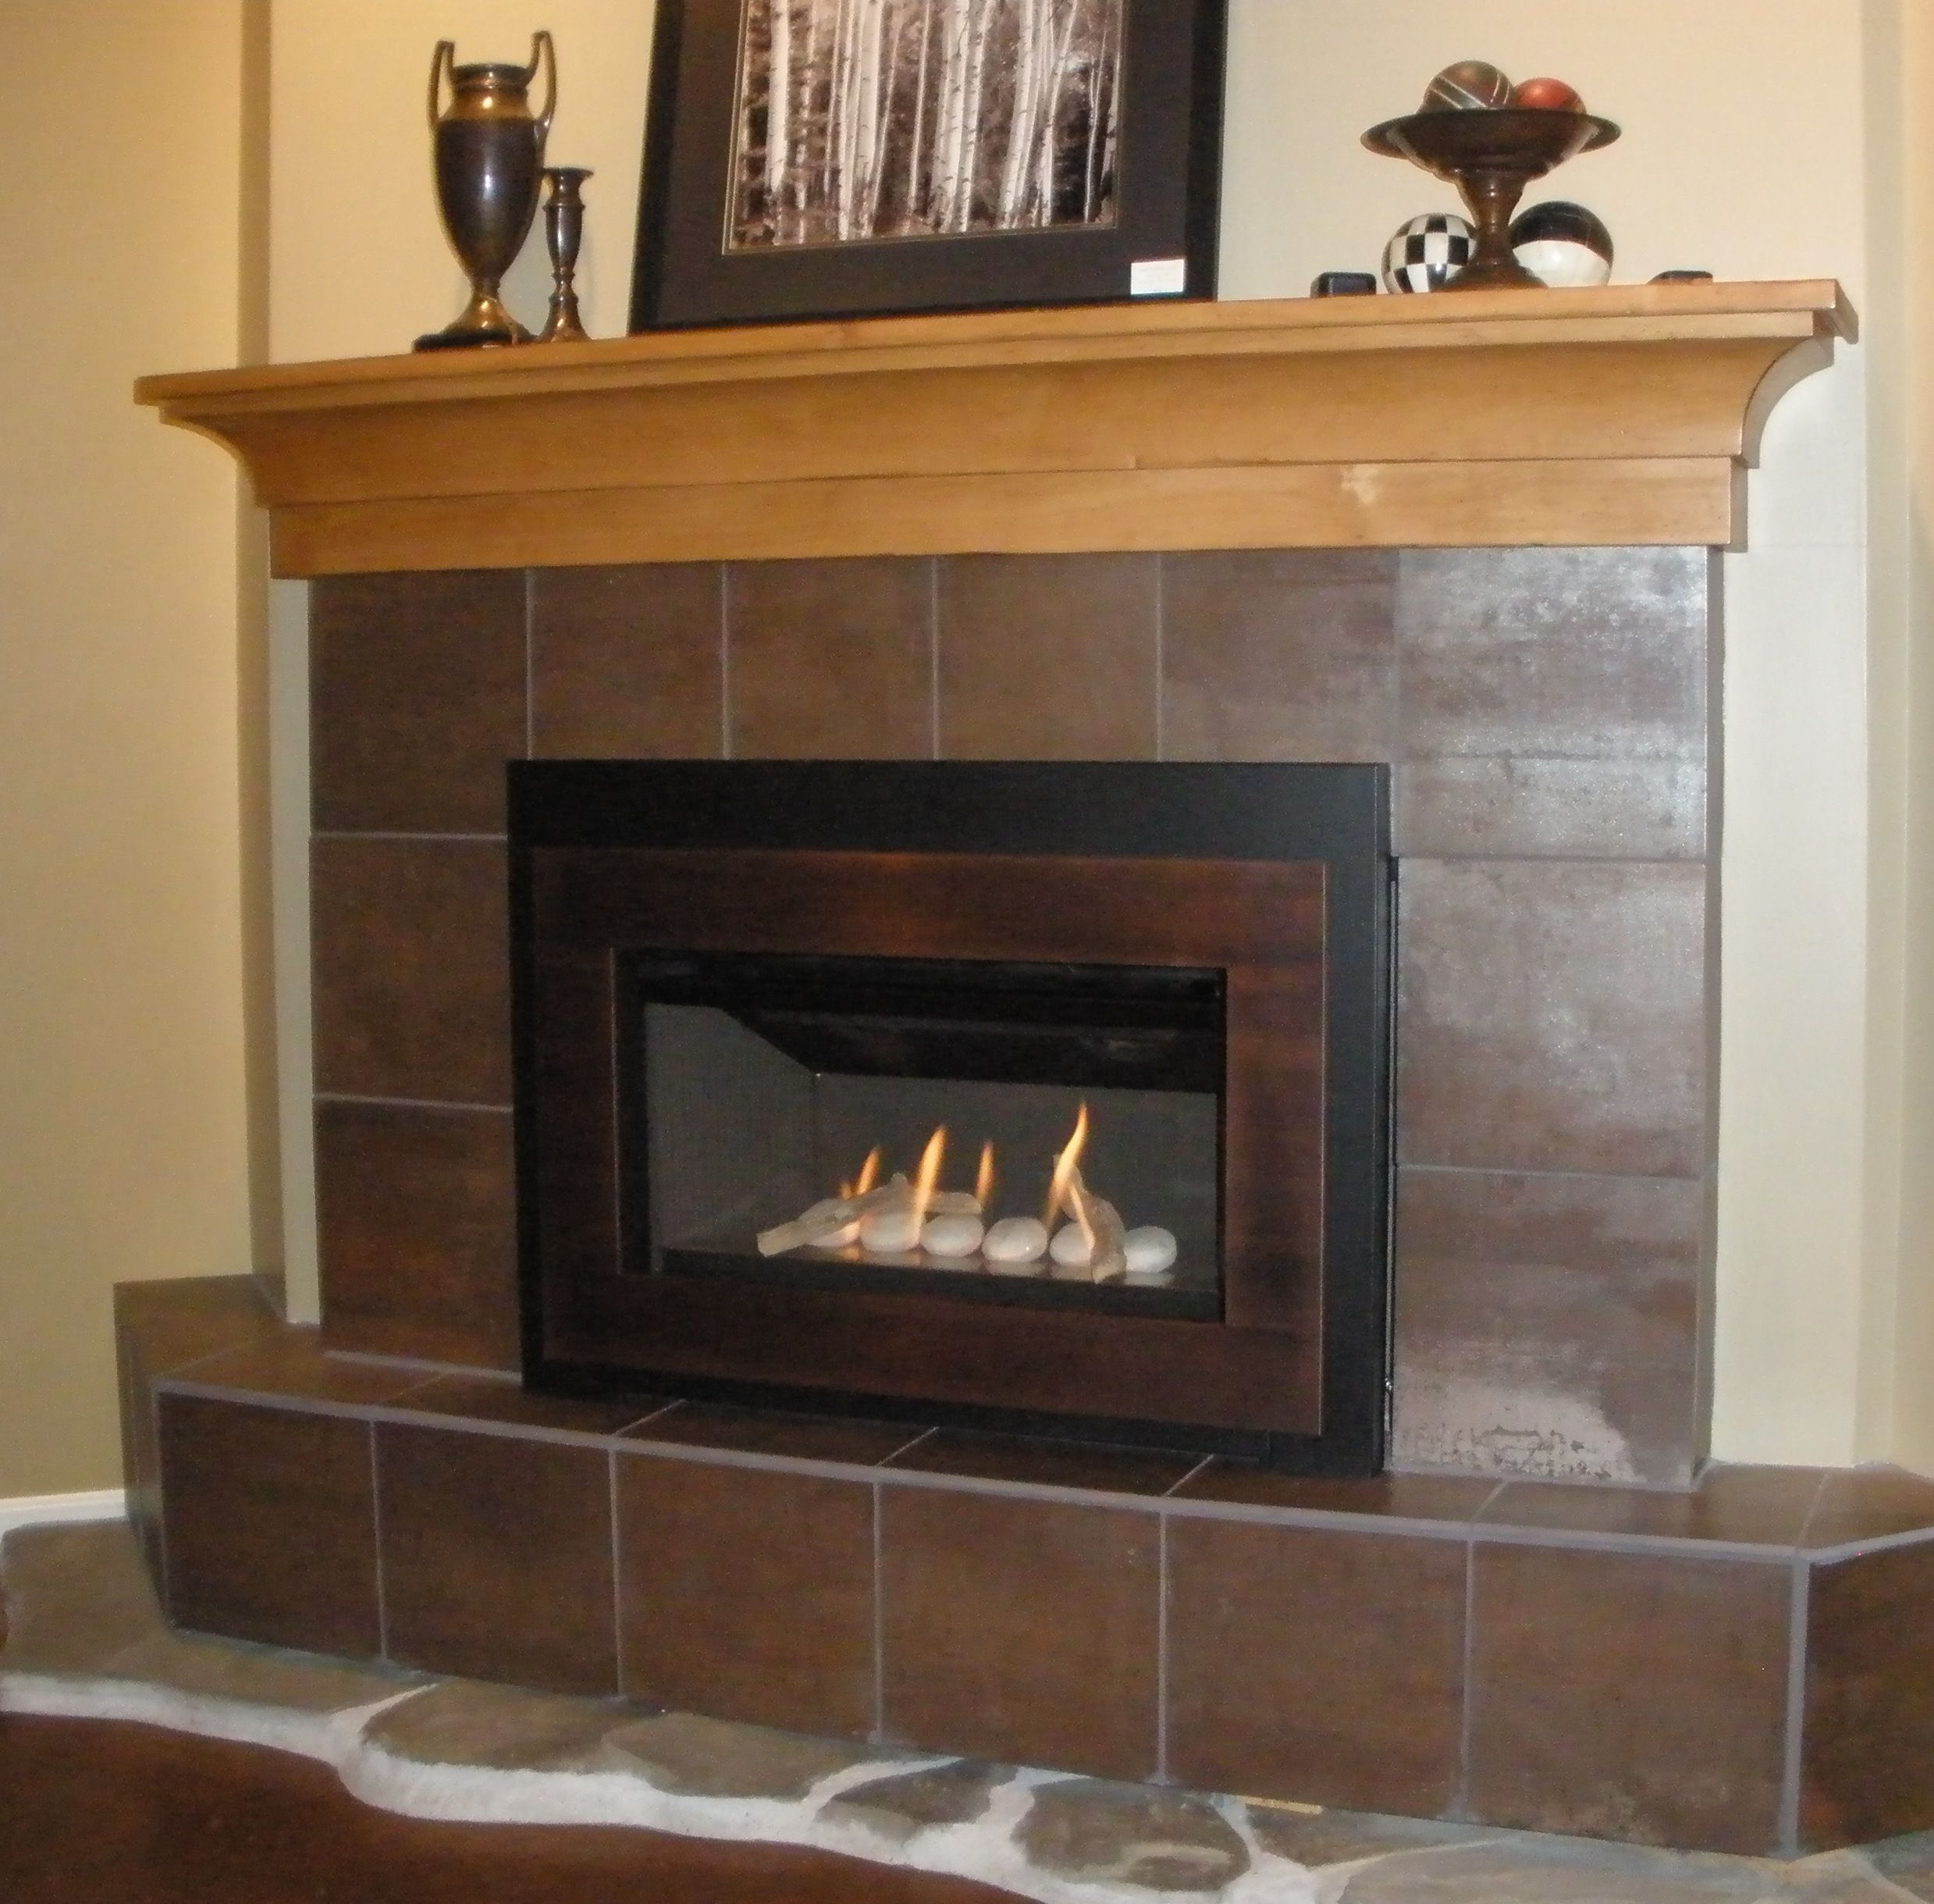 Coal Burning Fireplace Inspirational Pin On Valor Radiant Gas Fireplaces Midwest Dealer